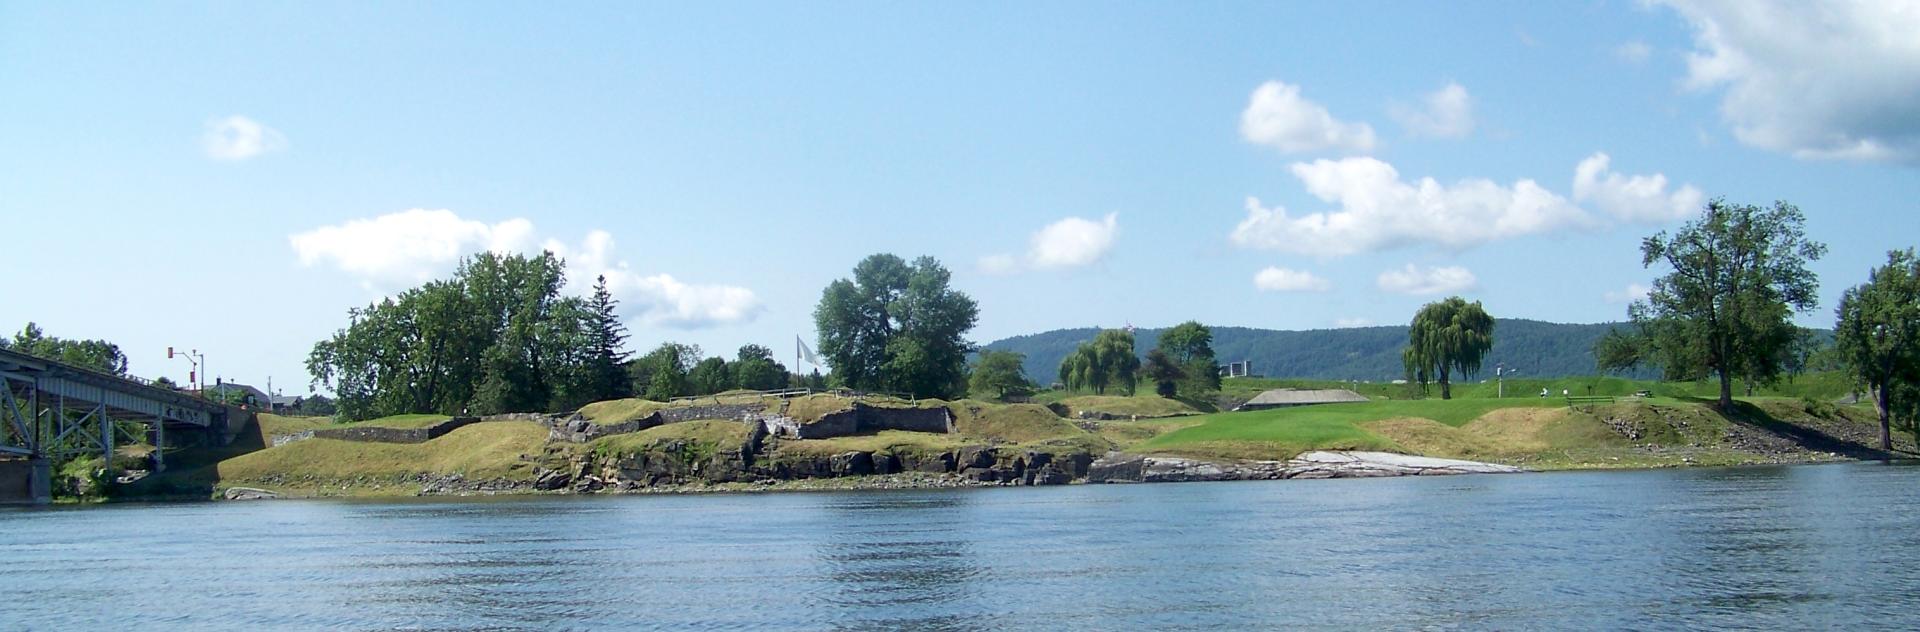 The view from the lake shows off the extensive grounds of Crown Point State Historic Site.